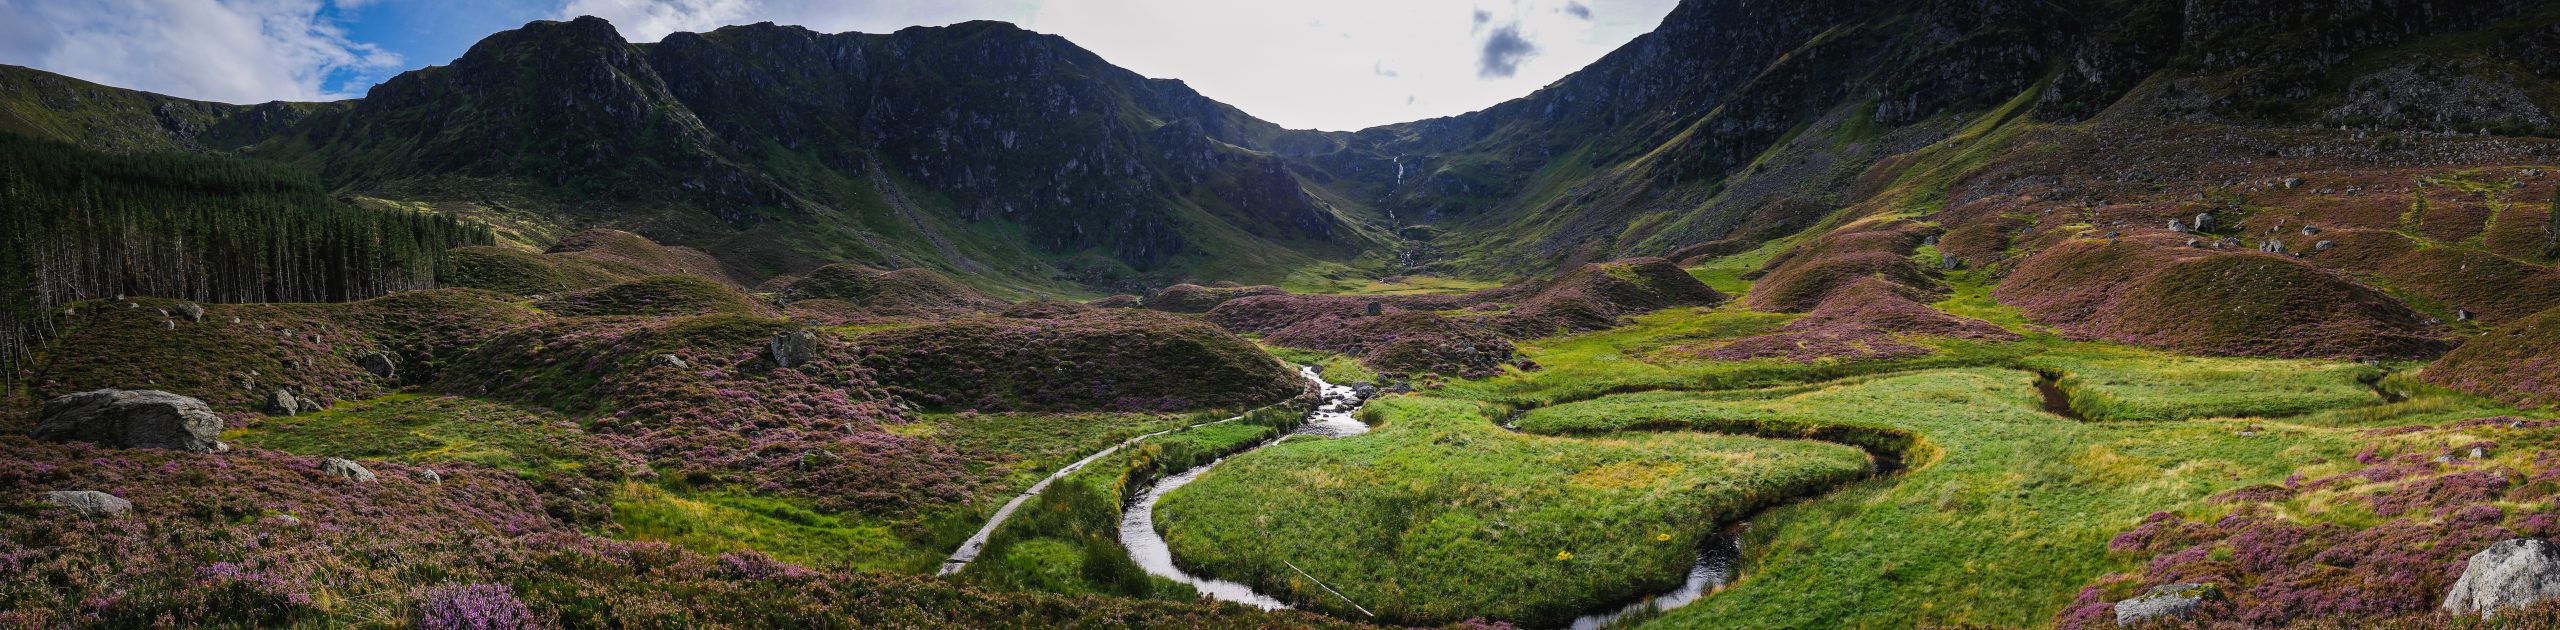 Panoramic view of spectacular Corrie Fee in Glen Clova in the Angus Glens region in western Scotland